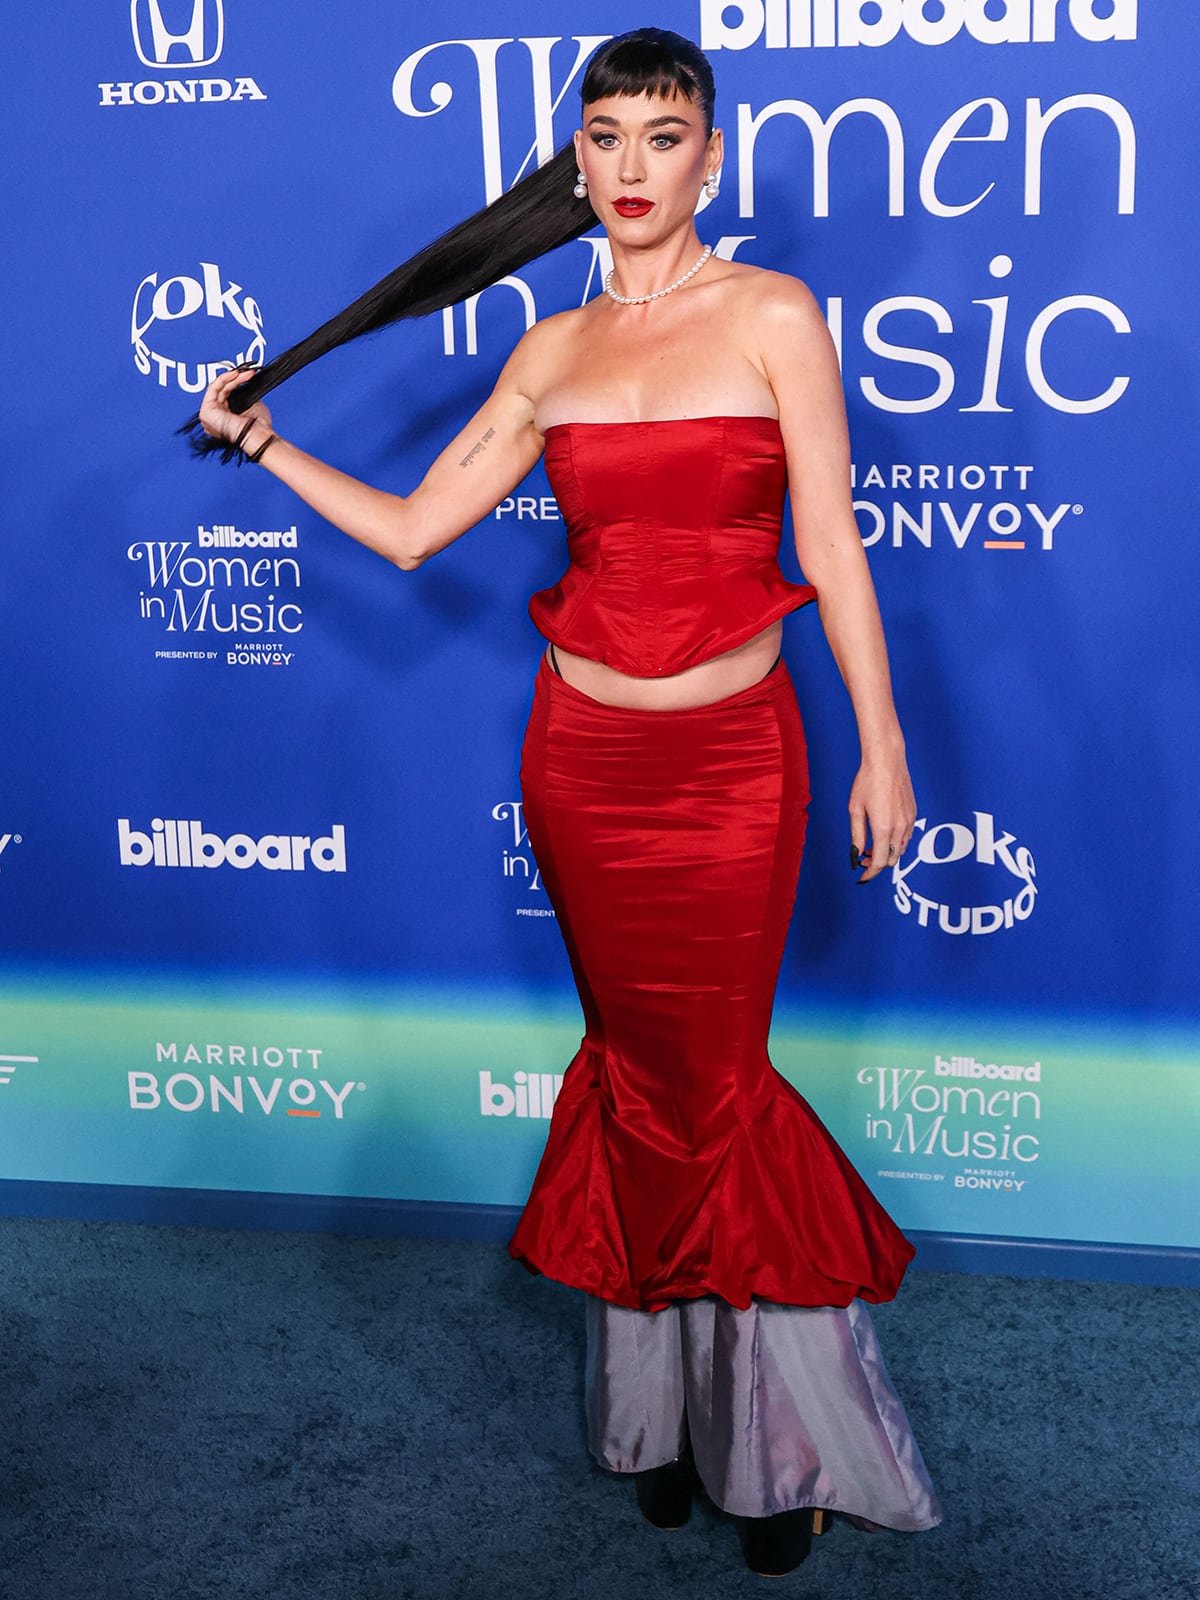 Katy Perry's red Ellie Misner outfit consists of a corset top and a mermaid skirt with a daring lace-up back